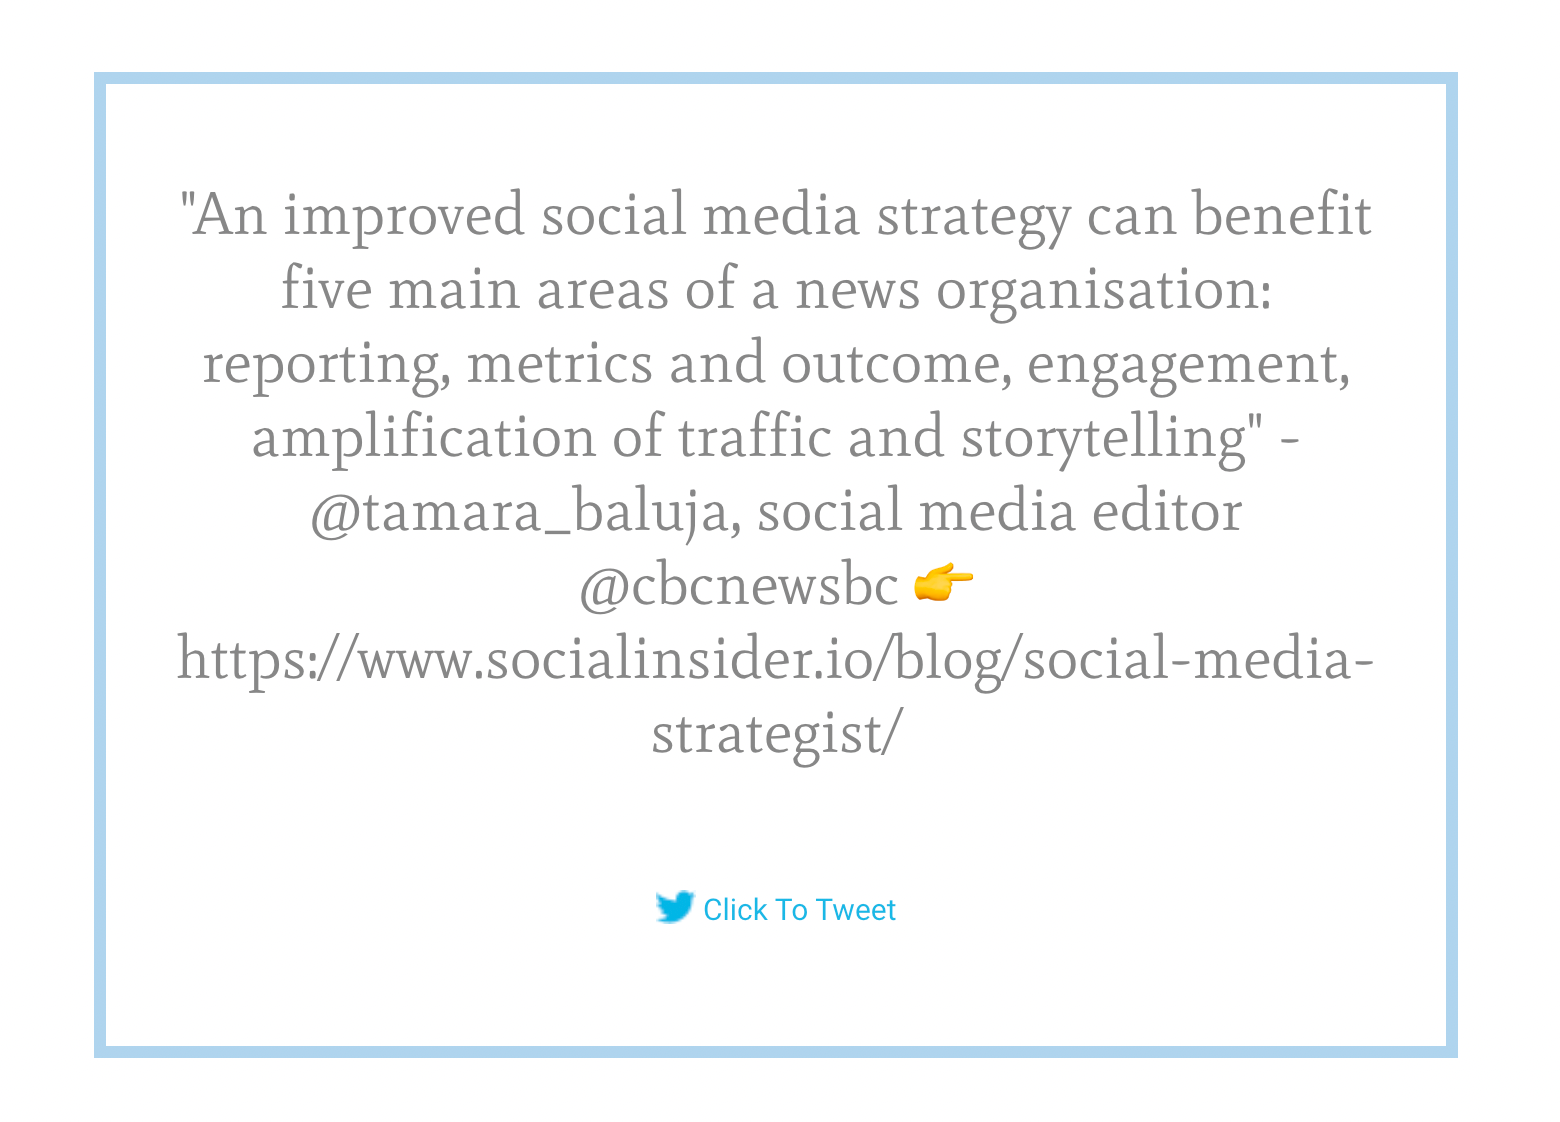 Here is an example of how to use Tweetable quote to increase Twitter followers.